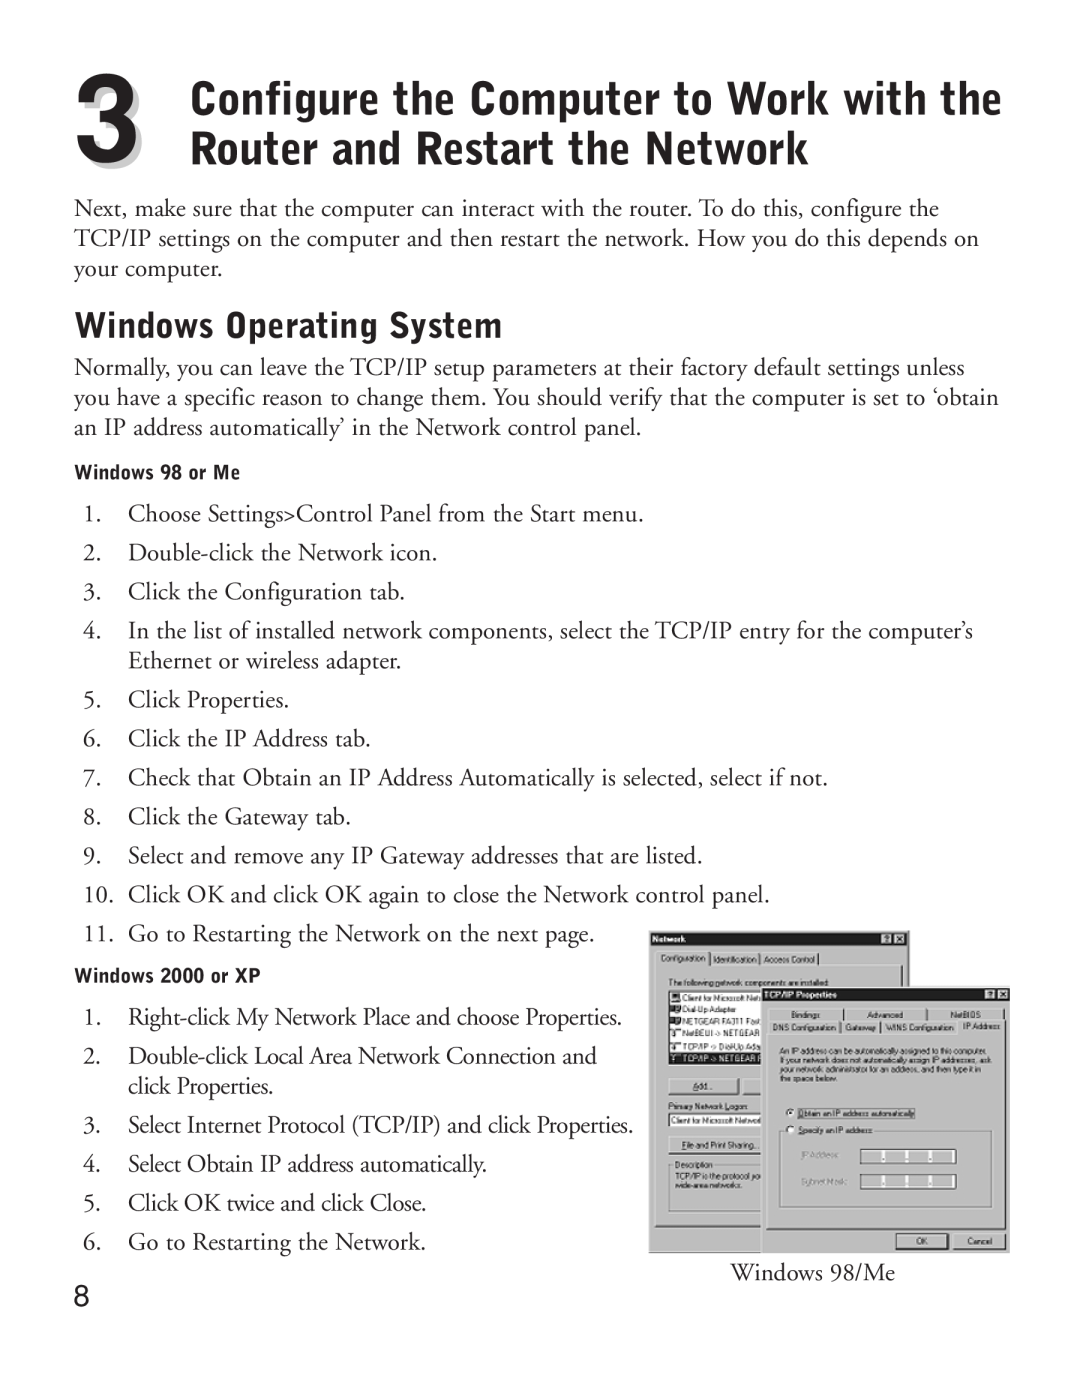 NETGEAR HR314 manual Router and Restart the Network, Windows Operating System, Configure the Computer to Work with the 